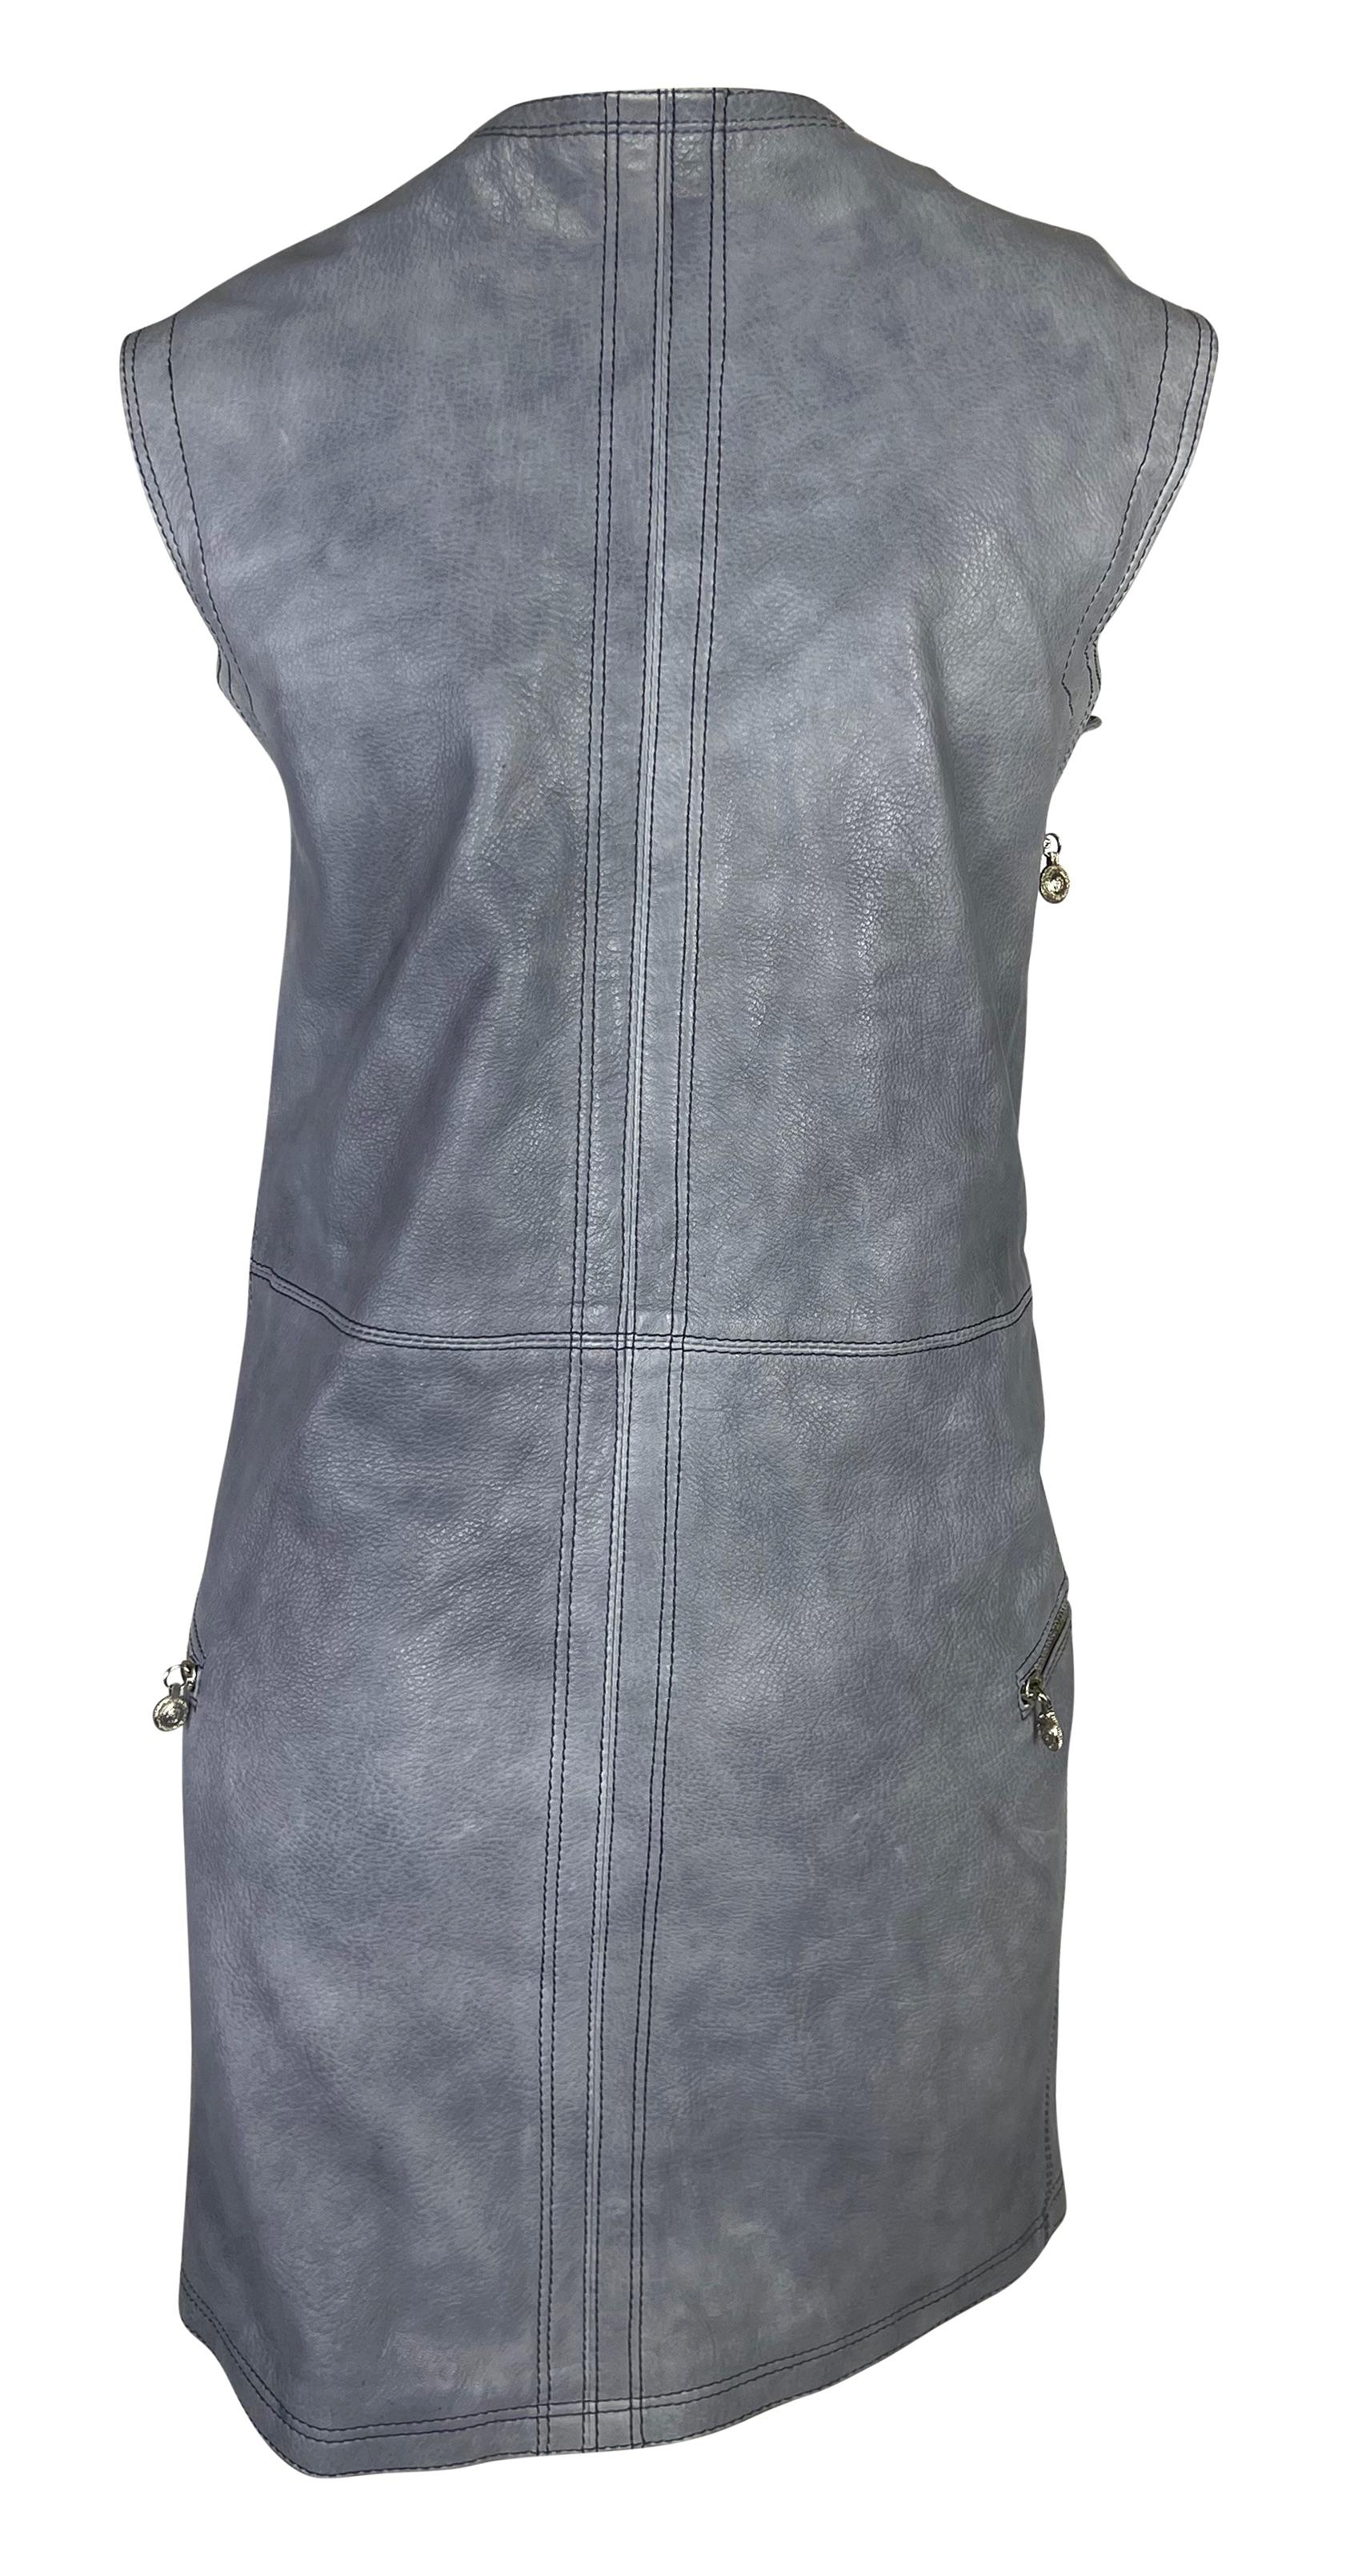 Women's NWT 1996 Gianni Versace Distressed Leather Medusa Zip Shift Dress For Sale